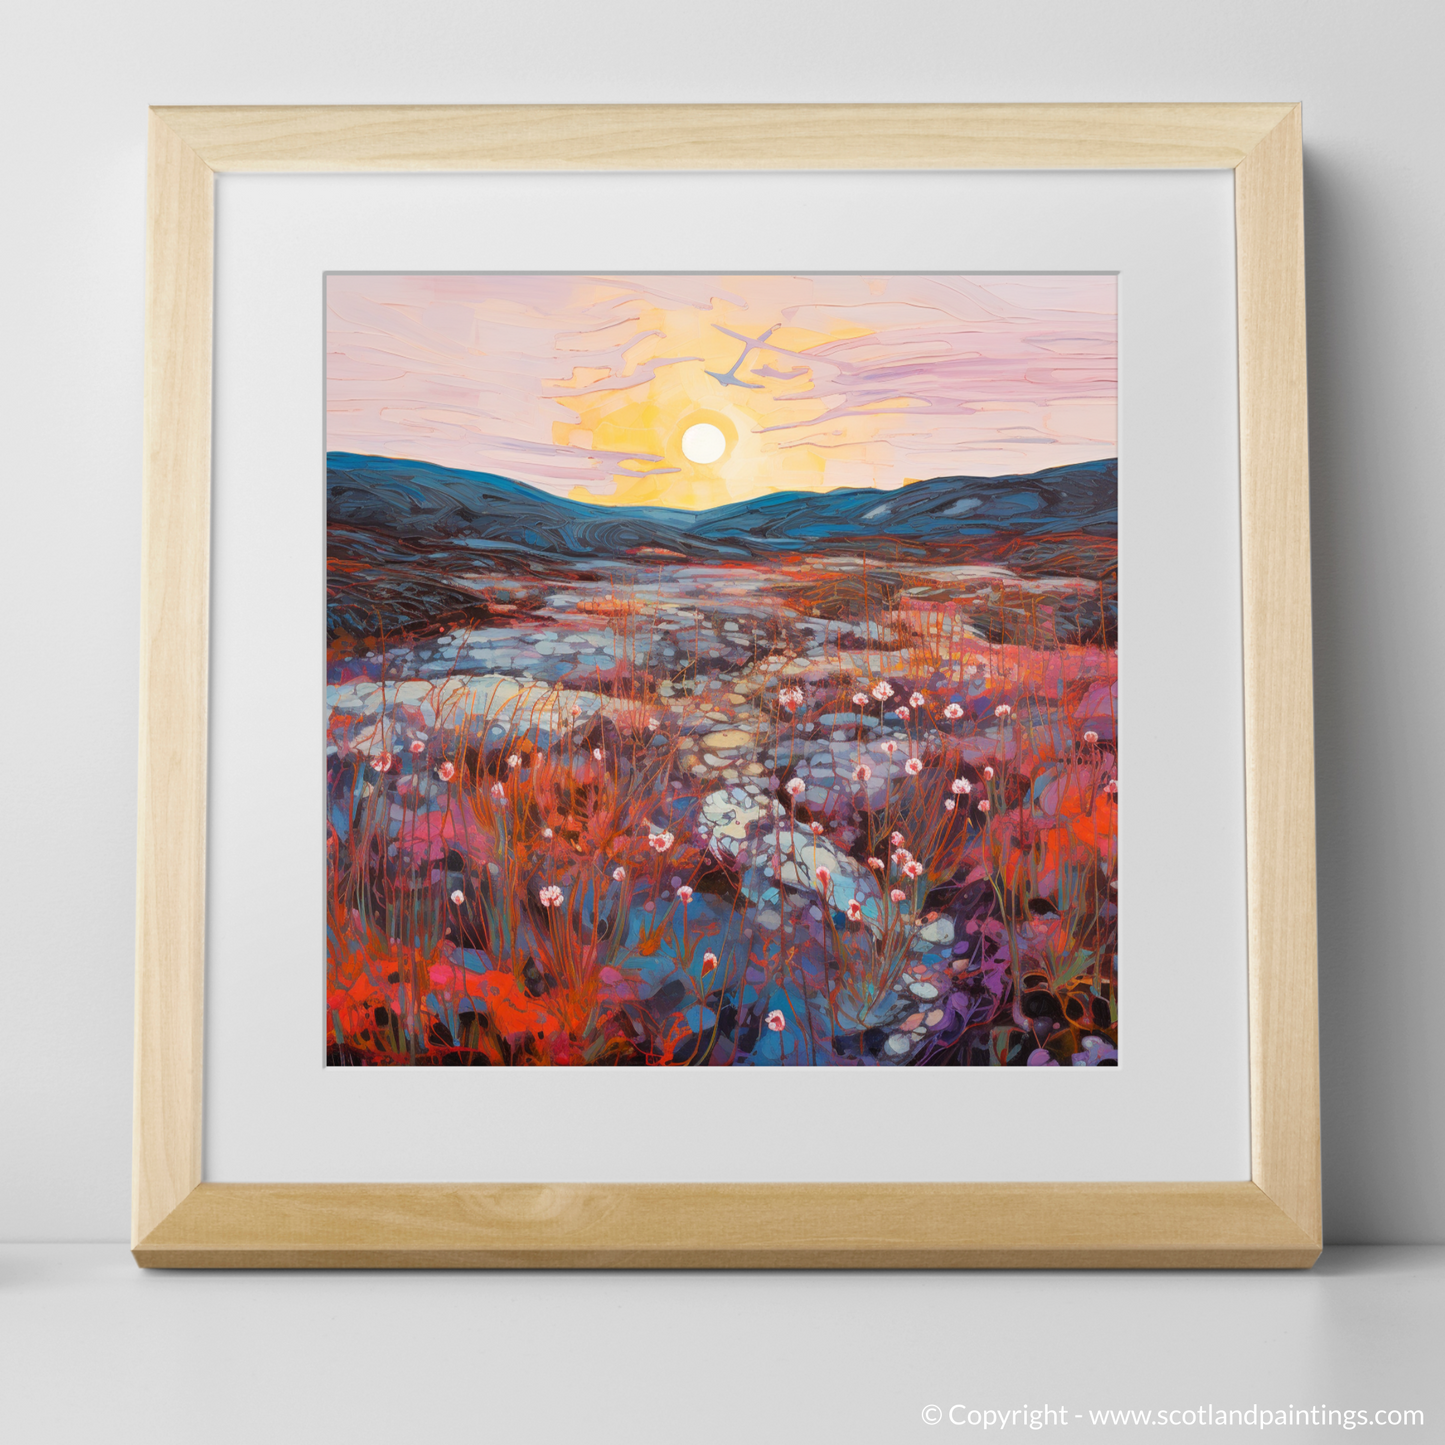 Art Print of Crowberry patches at dusk in Glencoe with a natural frame